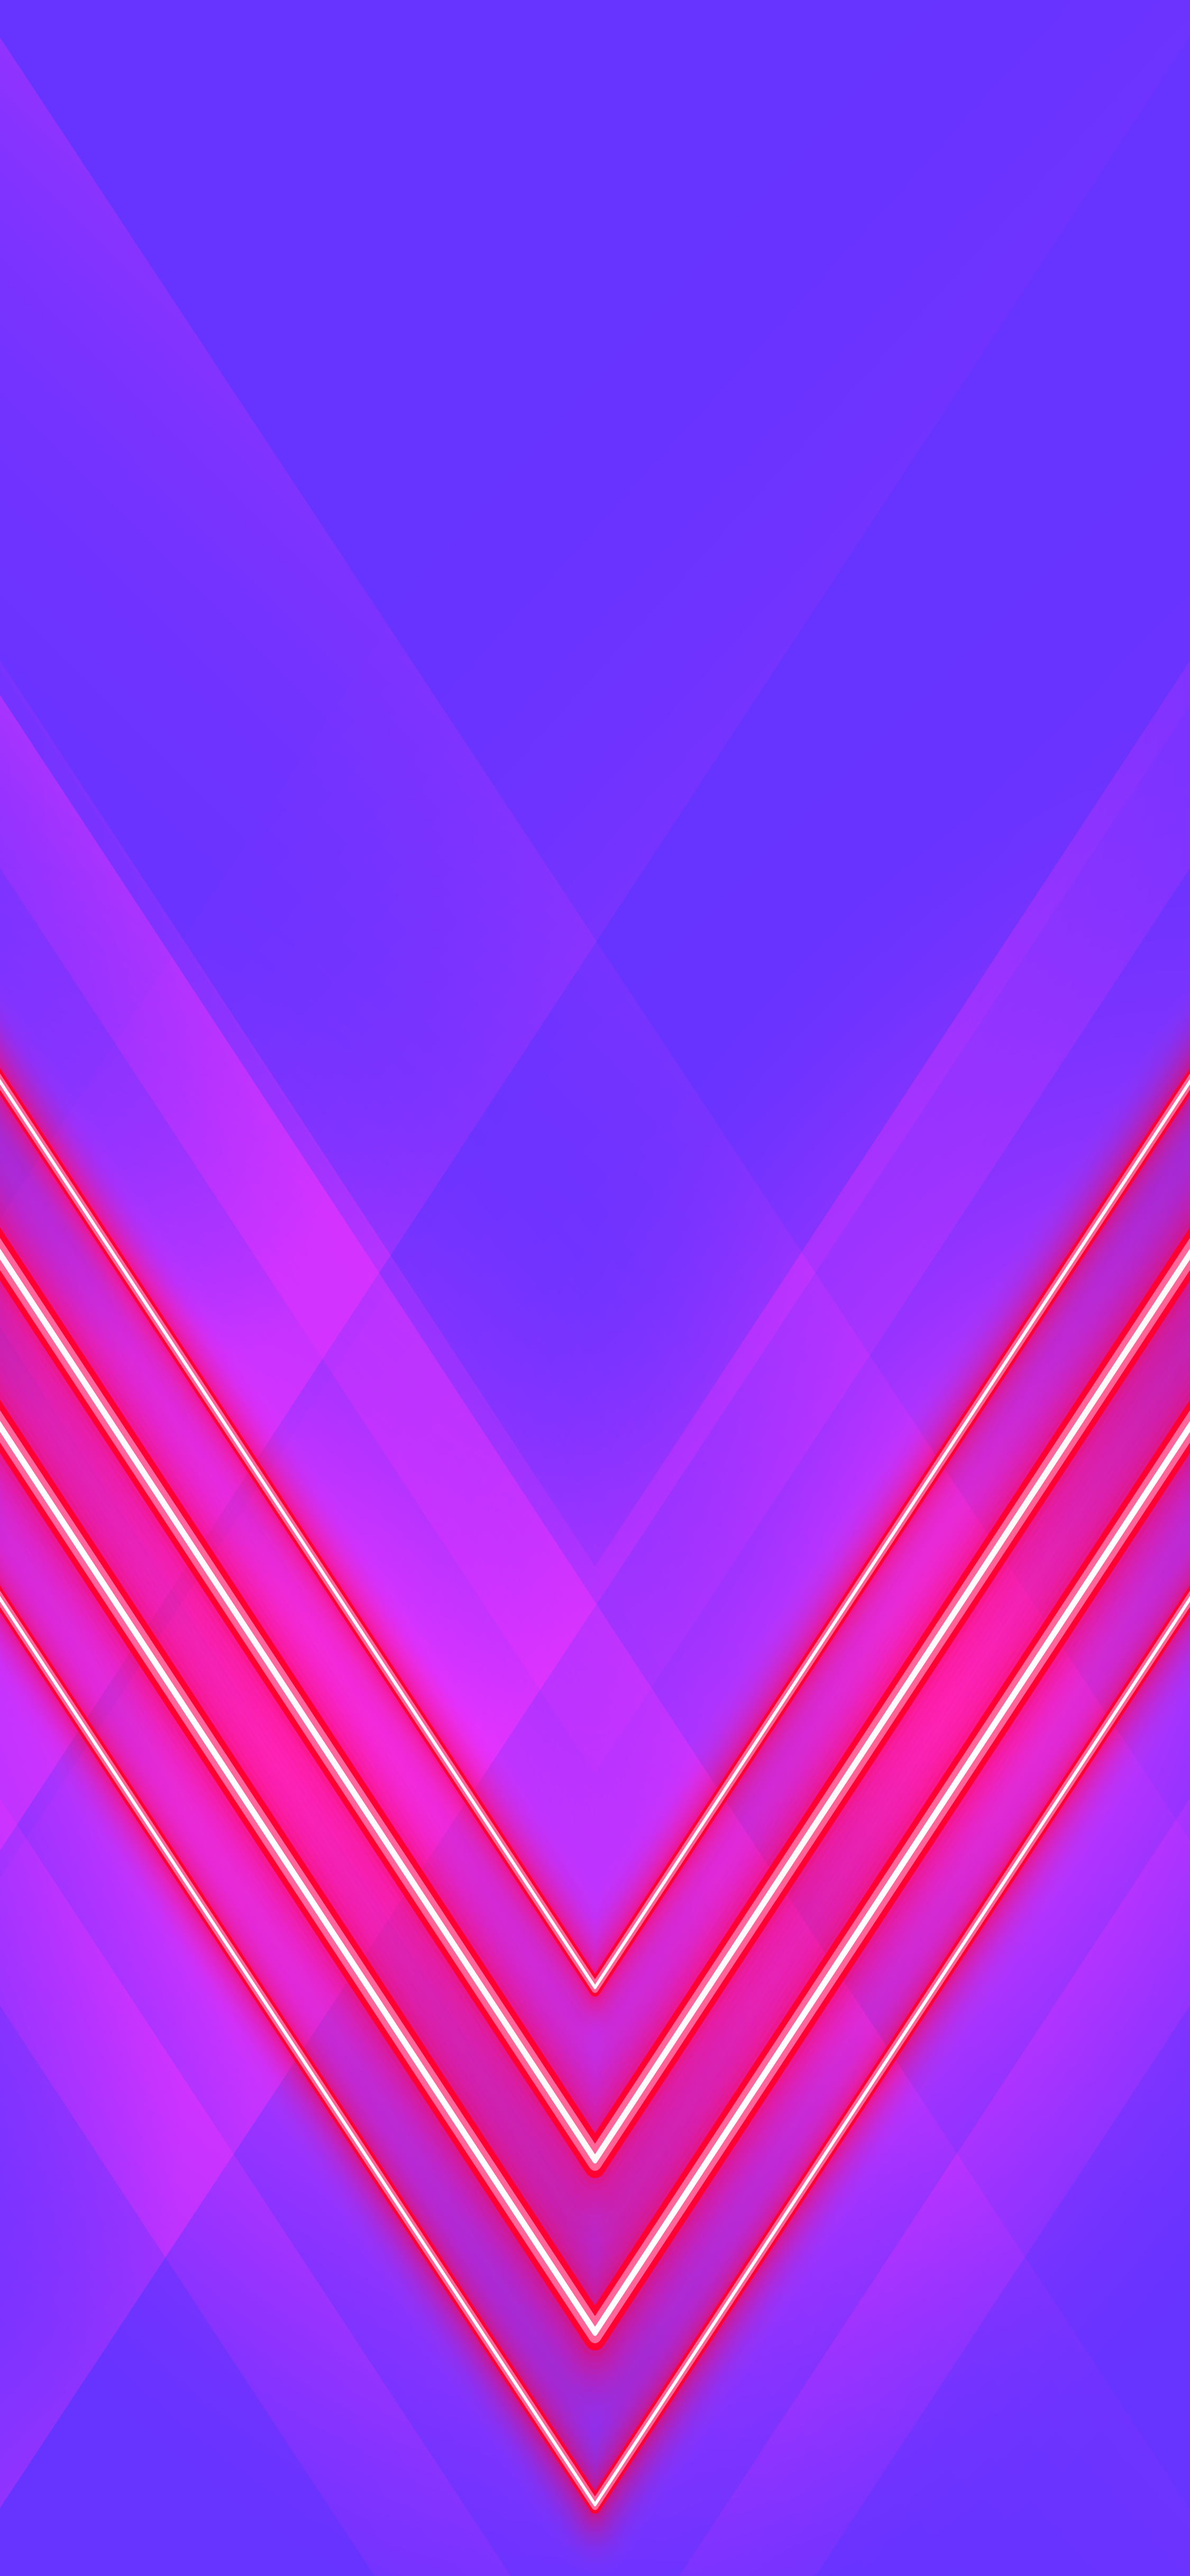 Neon light effect image adapted to use as phone wallpaper.